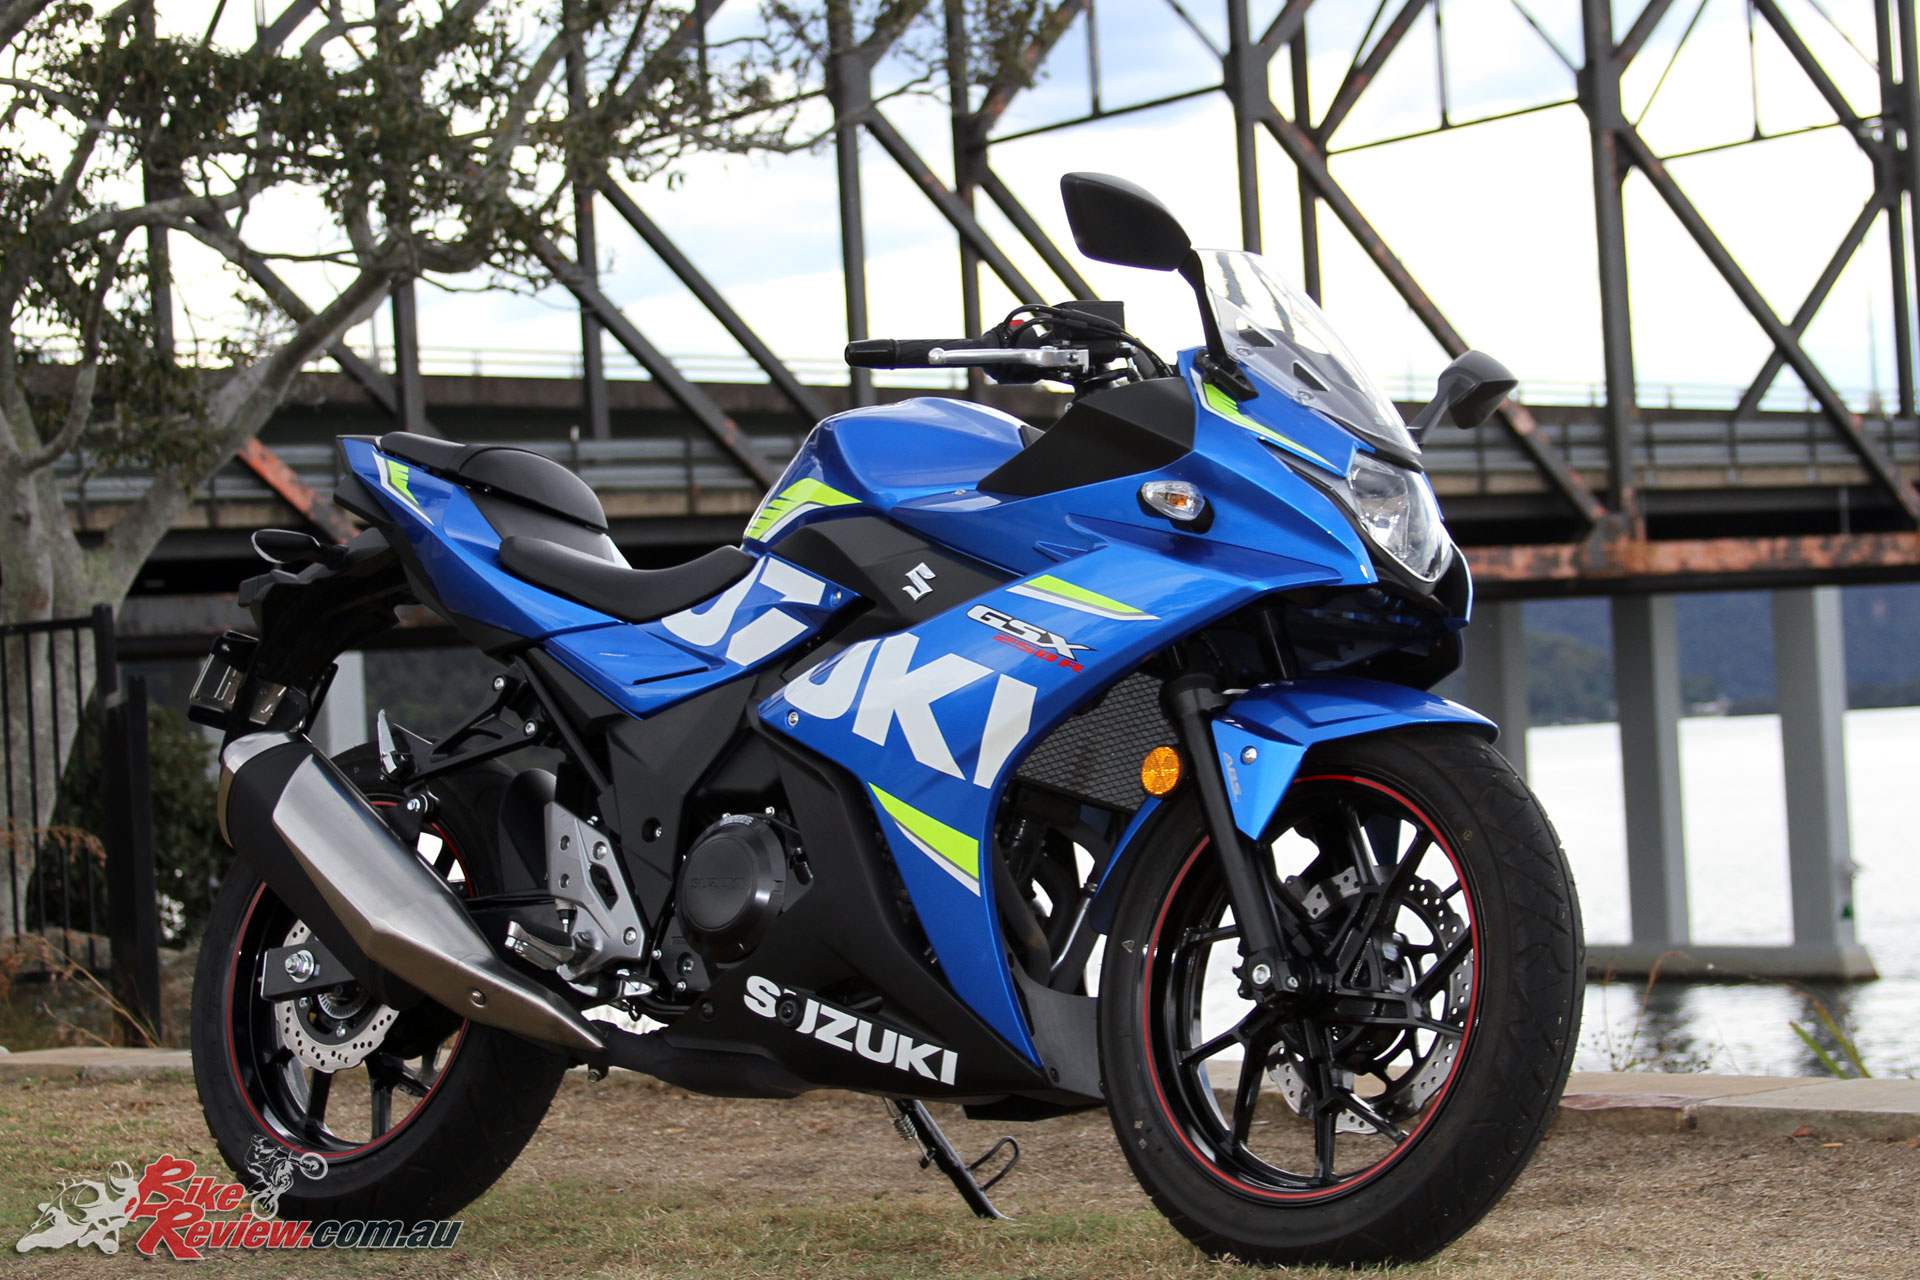 The Suzuki GSX250R offers a sporty option to their LAMS line-up